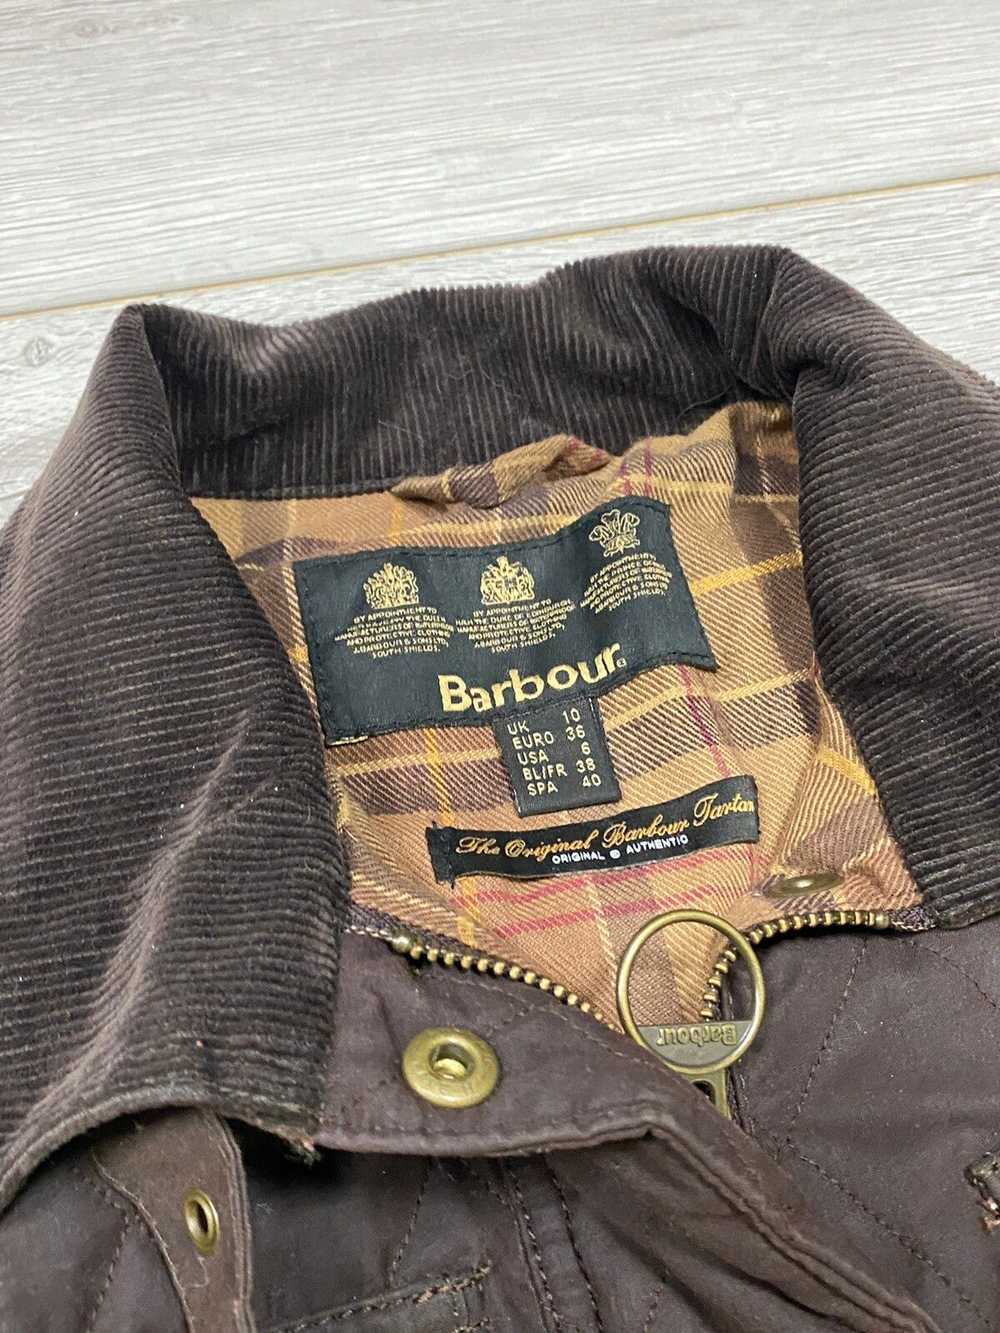 Barbour Barbour waxed international quilted jacke… - image 5